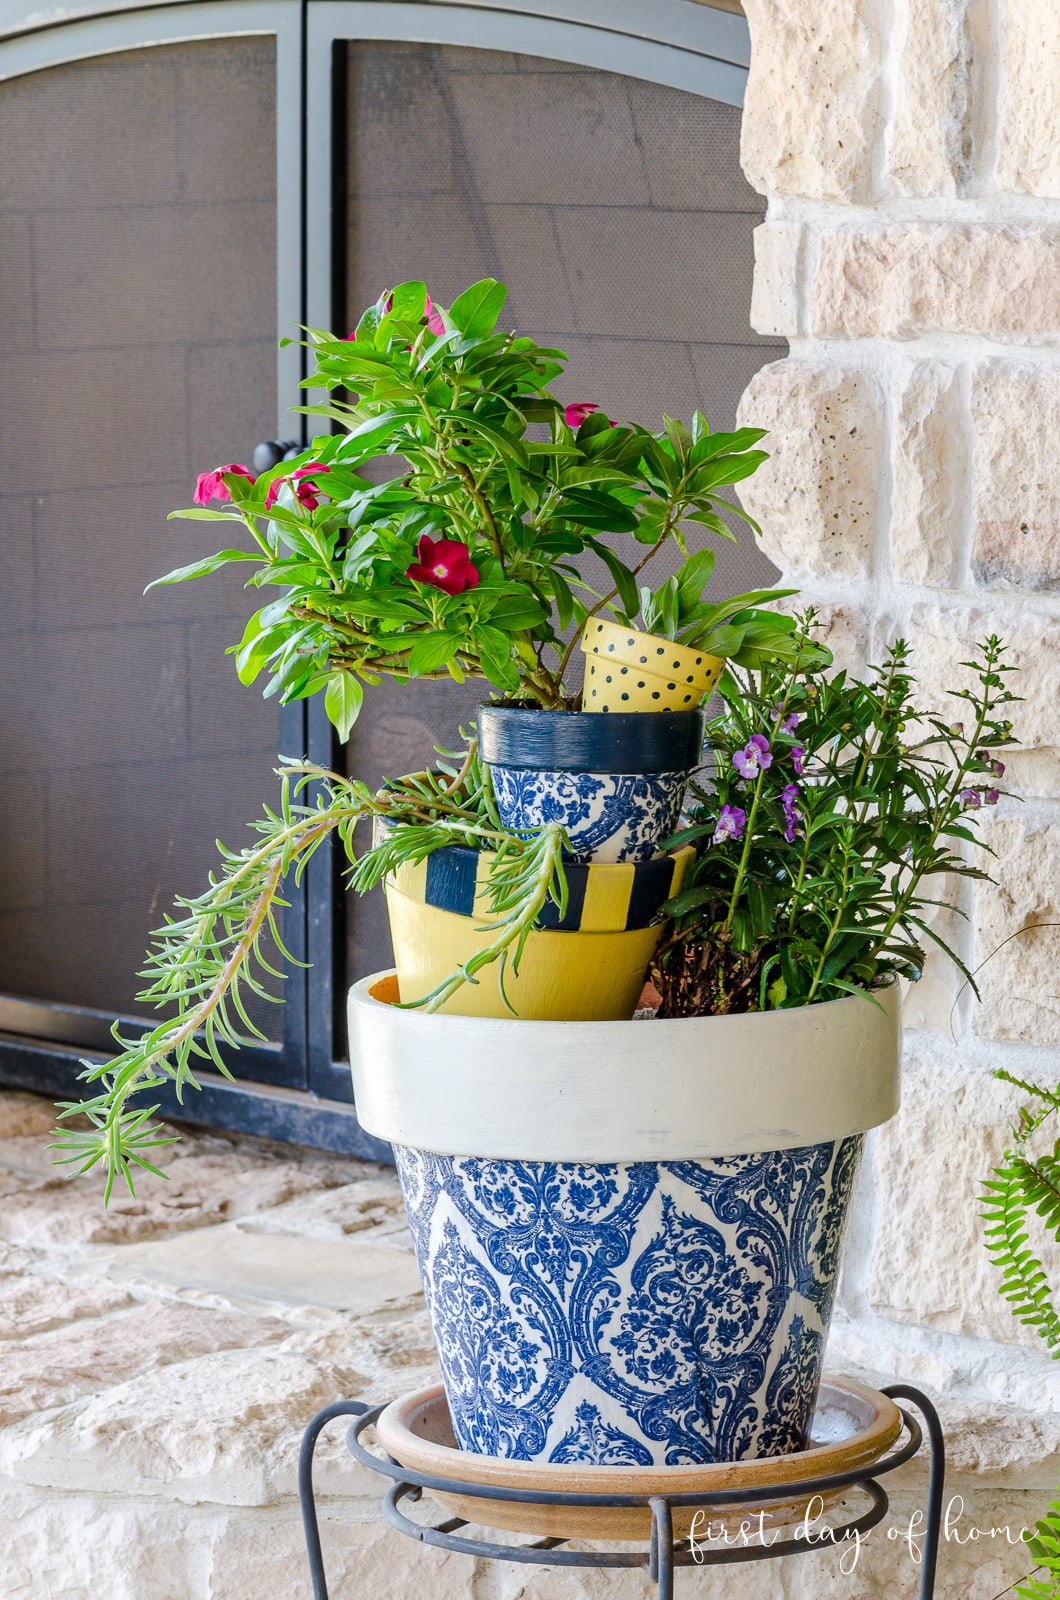 Decoupage stacked flower pots on plant stand by outdoor fireplace